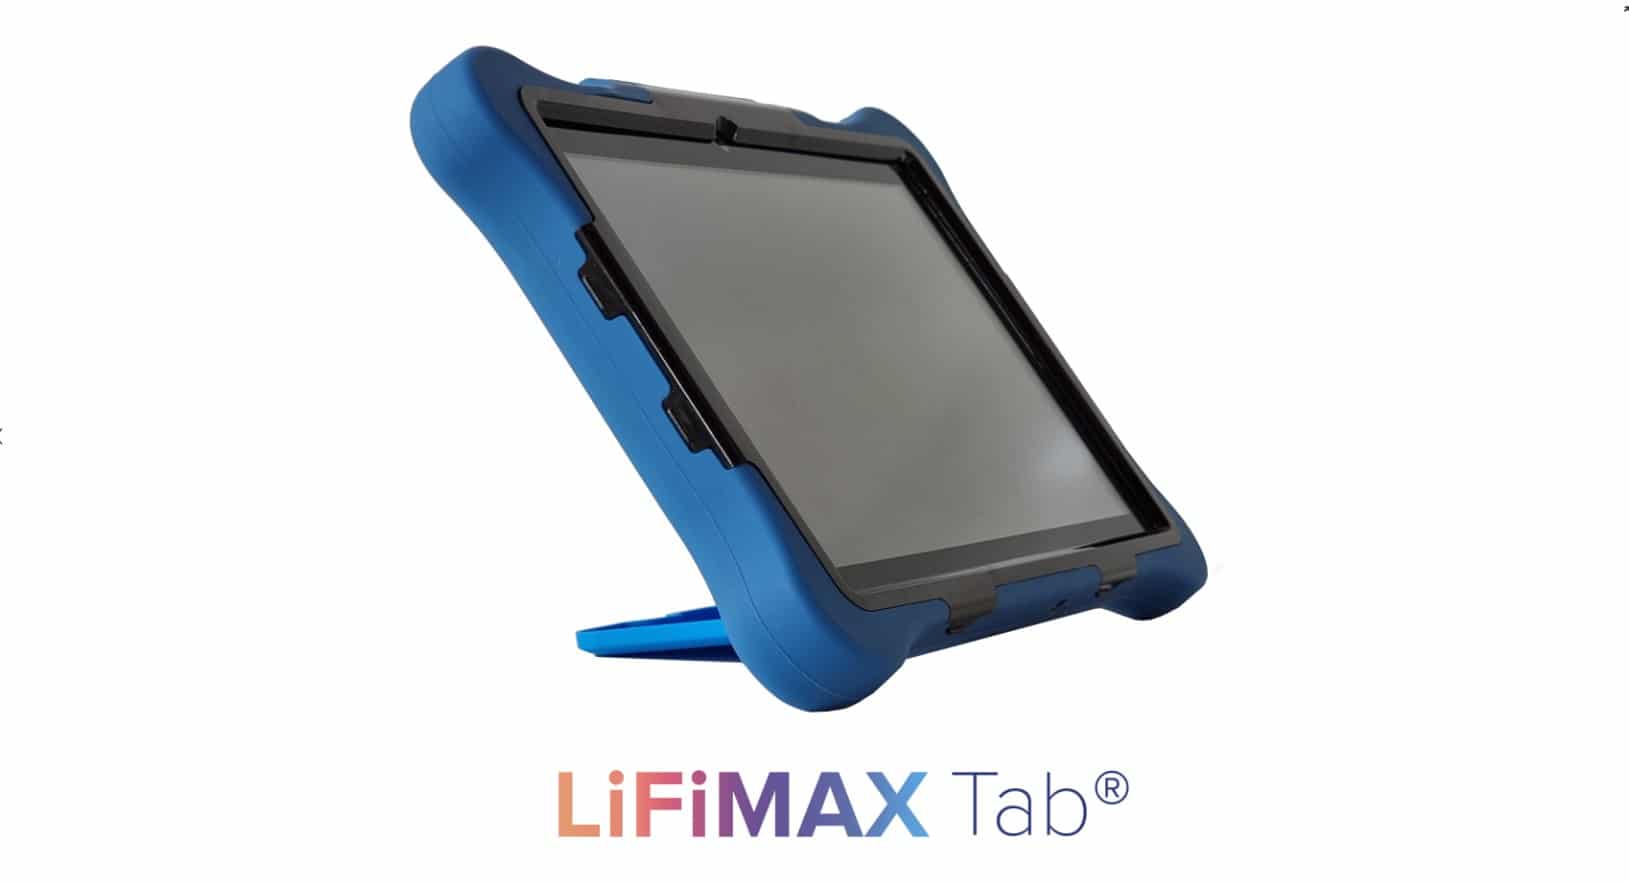 LiFiMAX Tab is the first Android tablet with Li-Fi